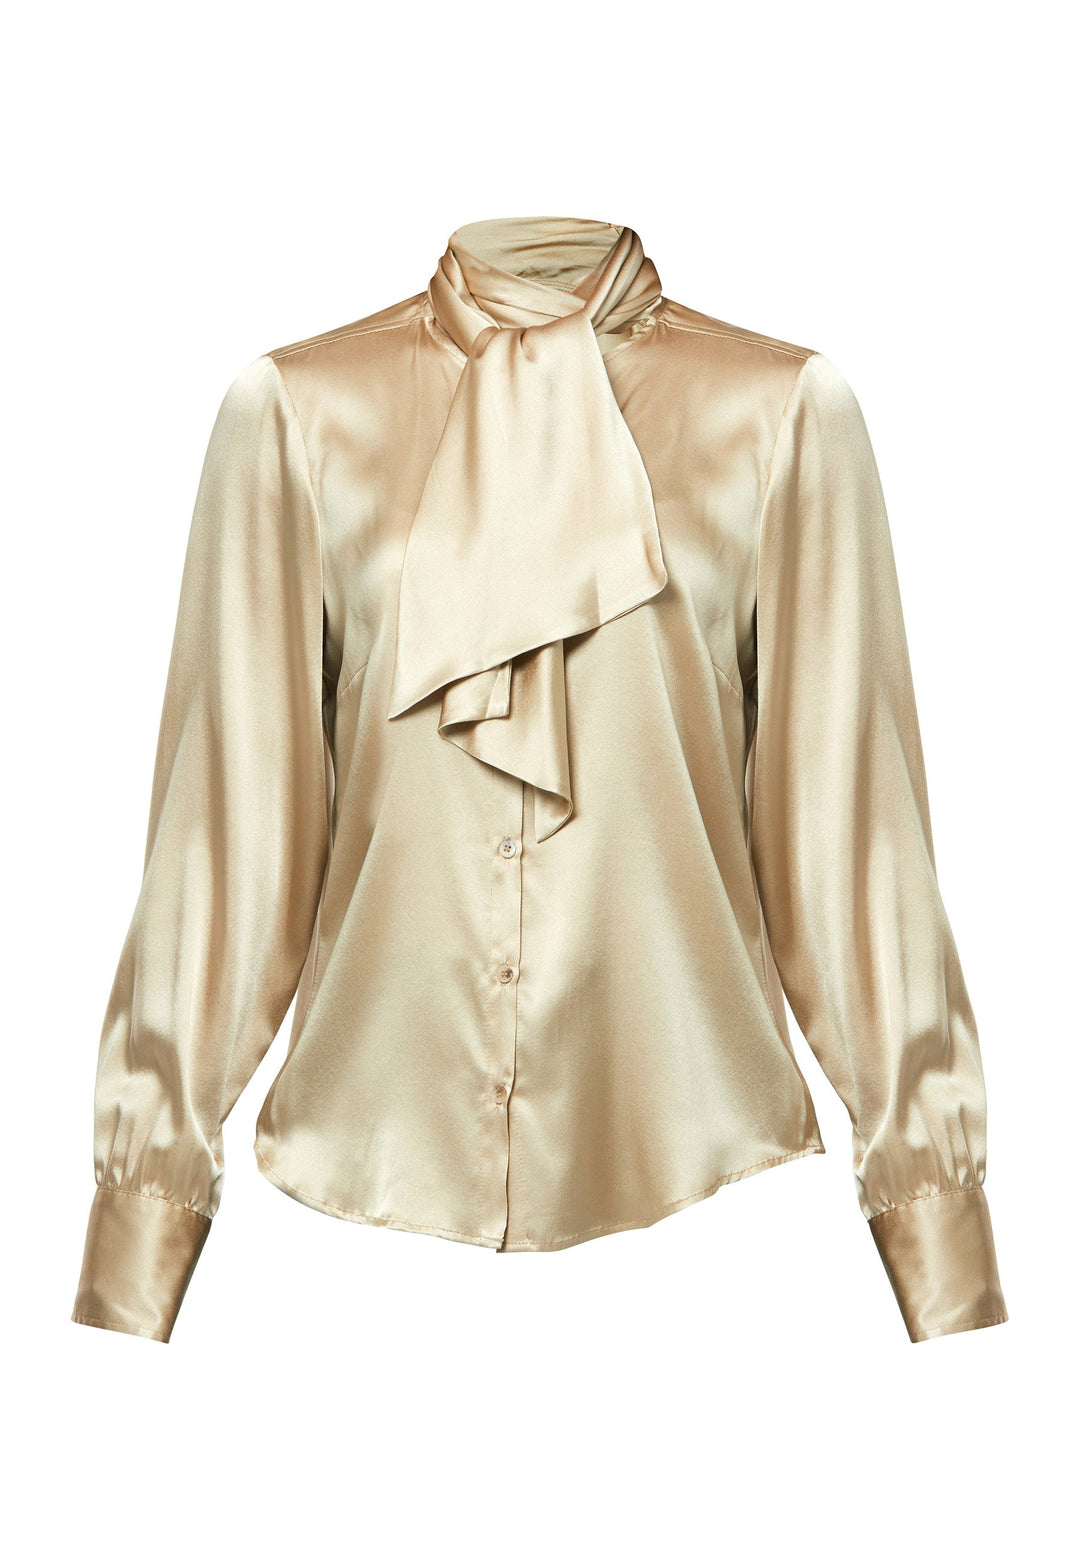  Crafted from a silk blend, it offers a luxurious feel against your skin. The button-down style pussy-bow neckline shirt.